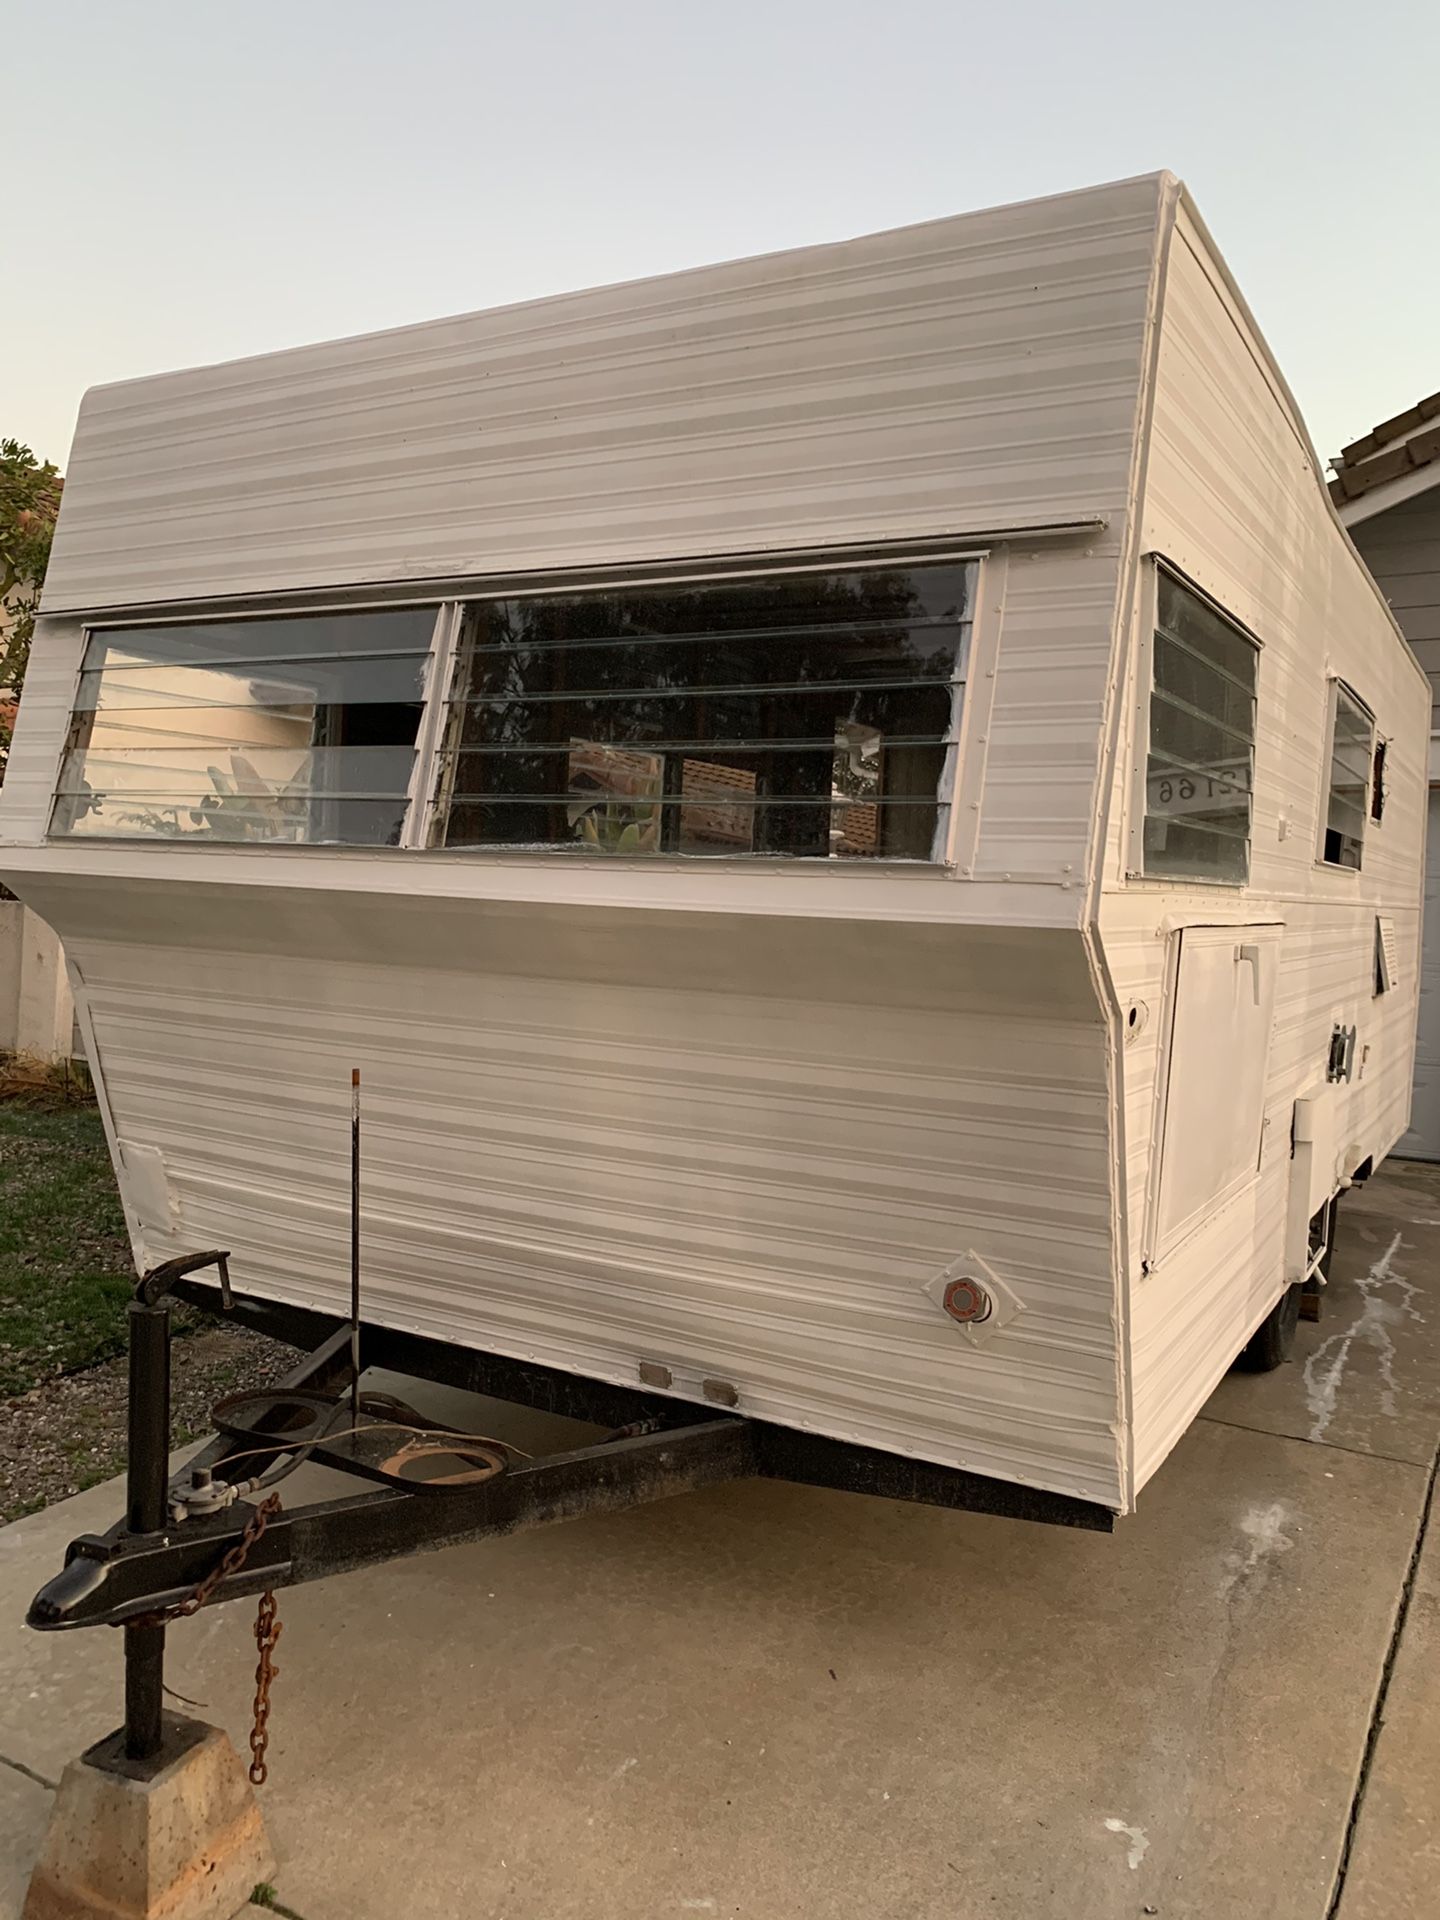 18’ Aristocrat Land Line camper/ rv trailer shell (~1966). Pick up now pending. Will update comment if it falls through.